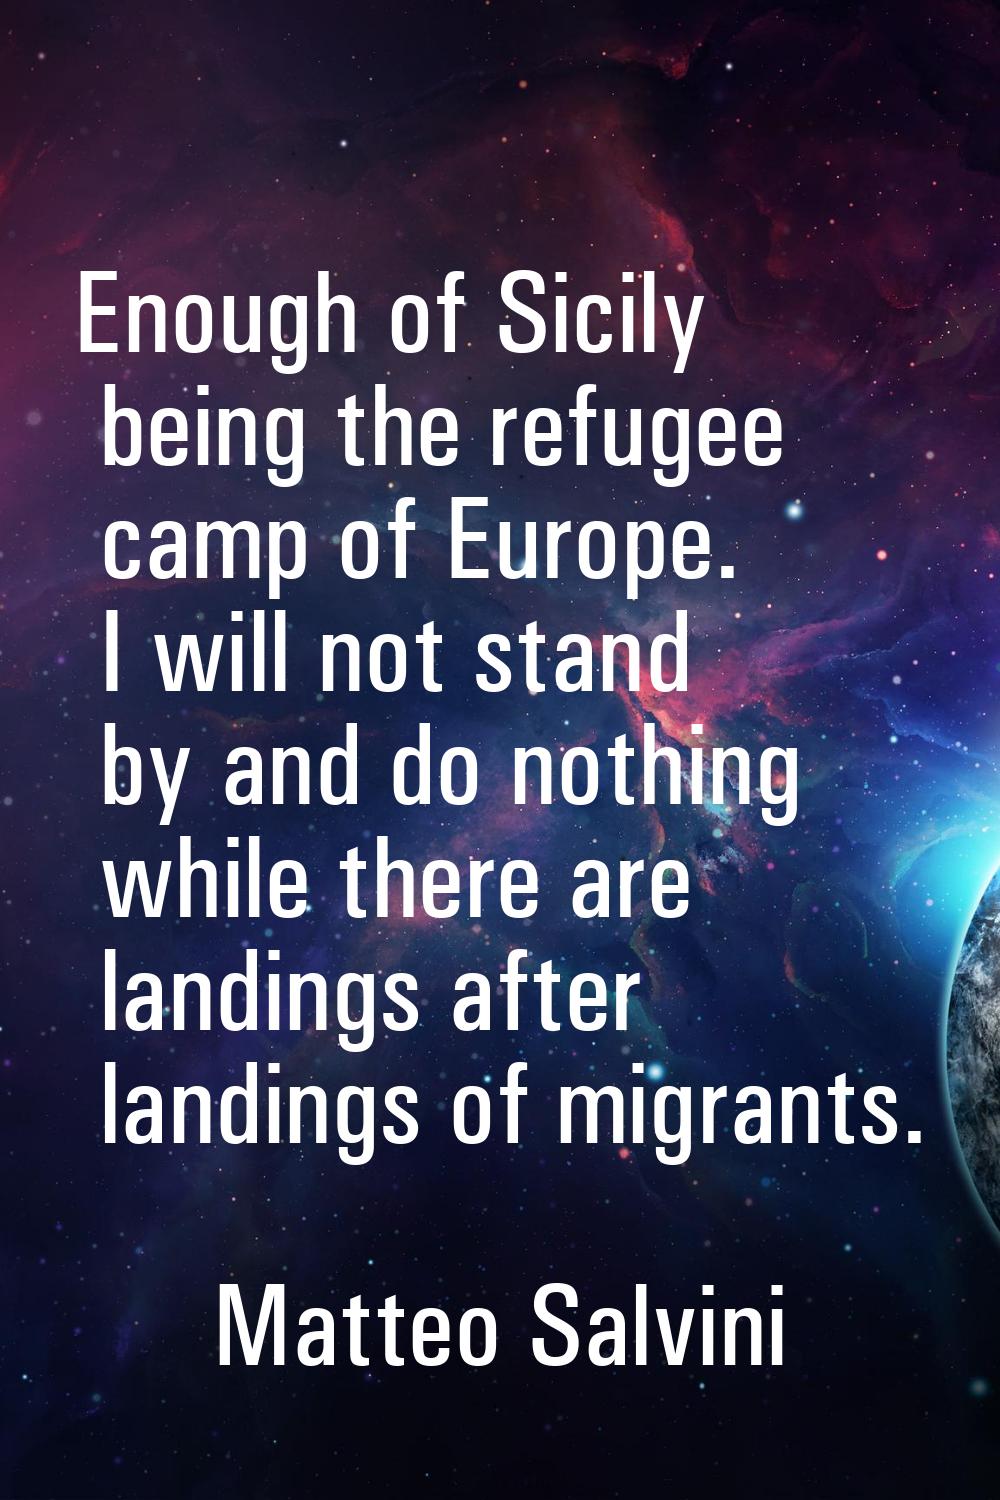 Enough of Sicily being the refugee camp of Europe. I will not stand by and do nothing while there a